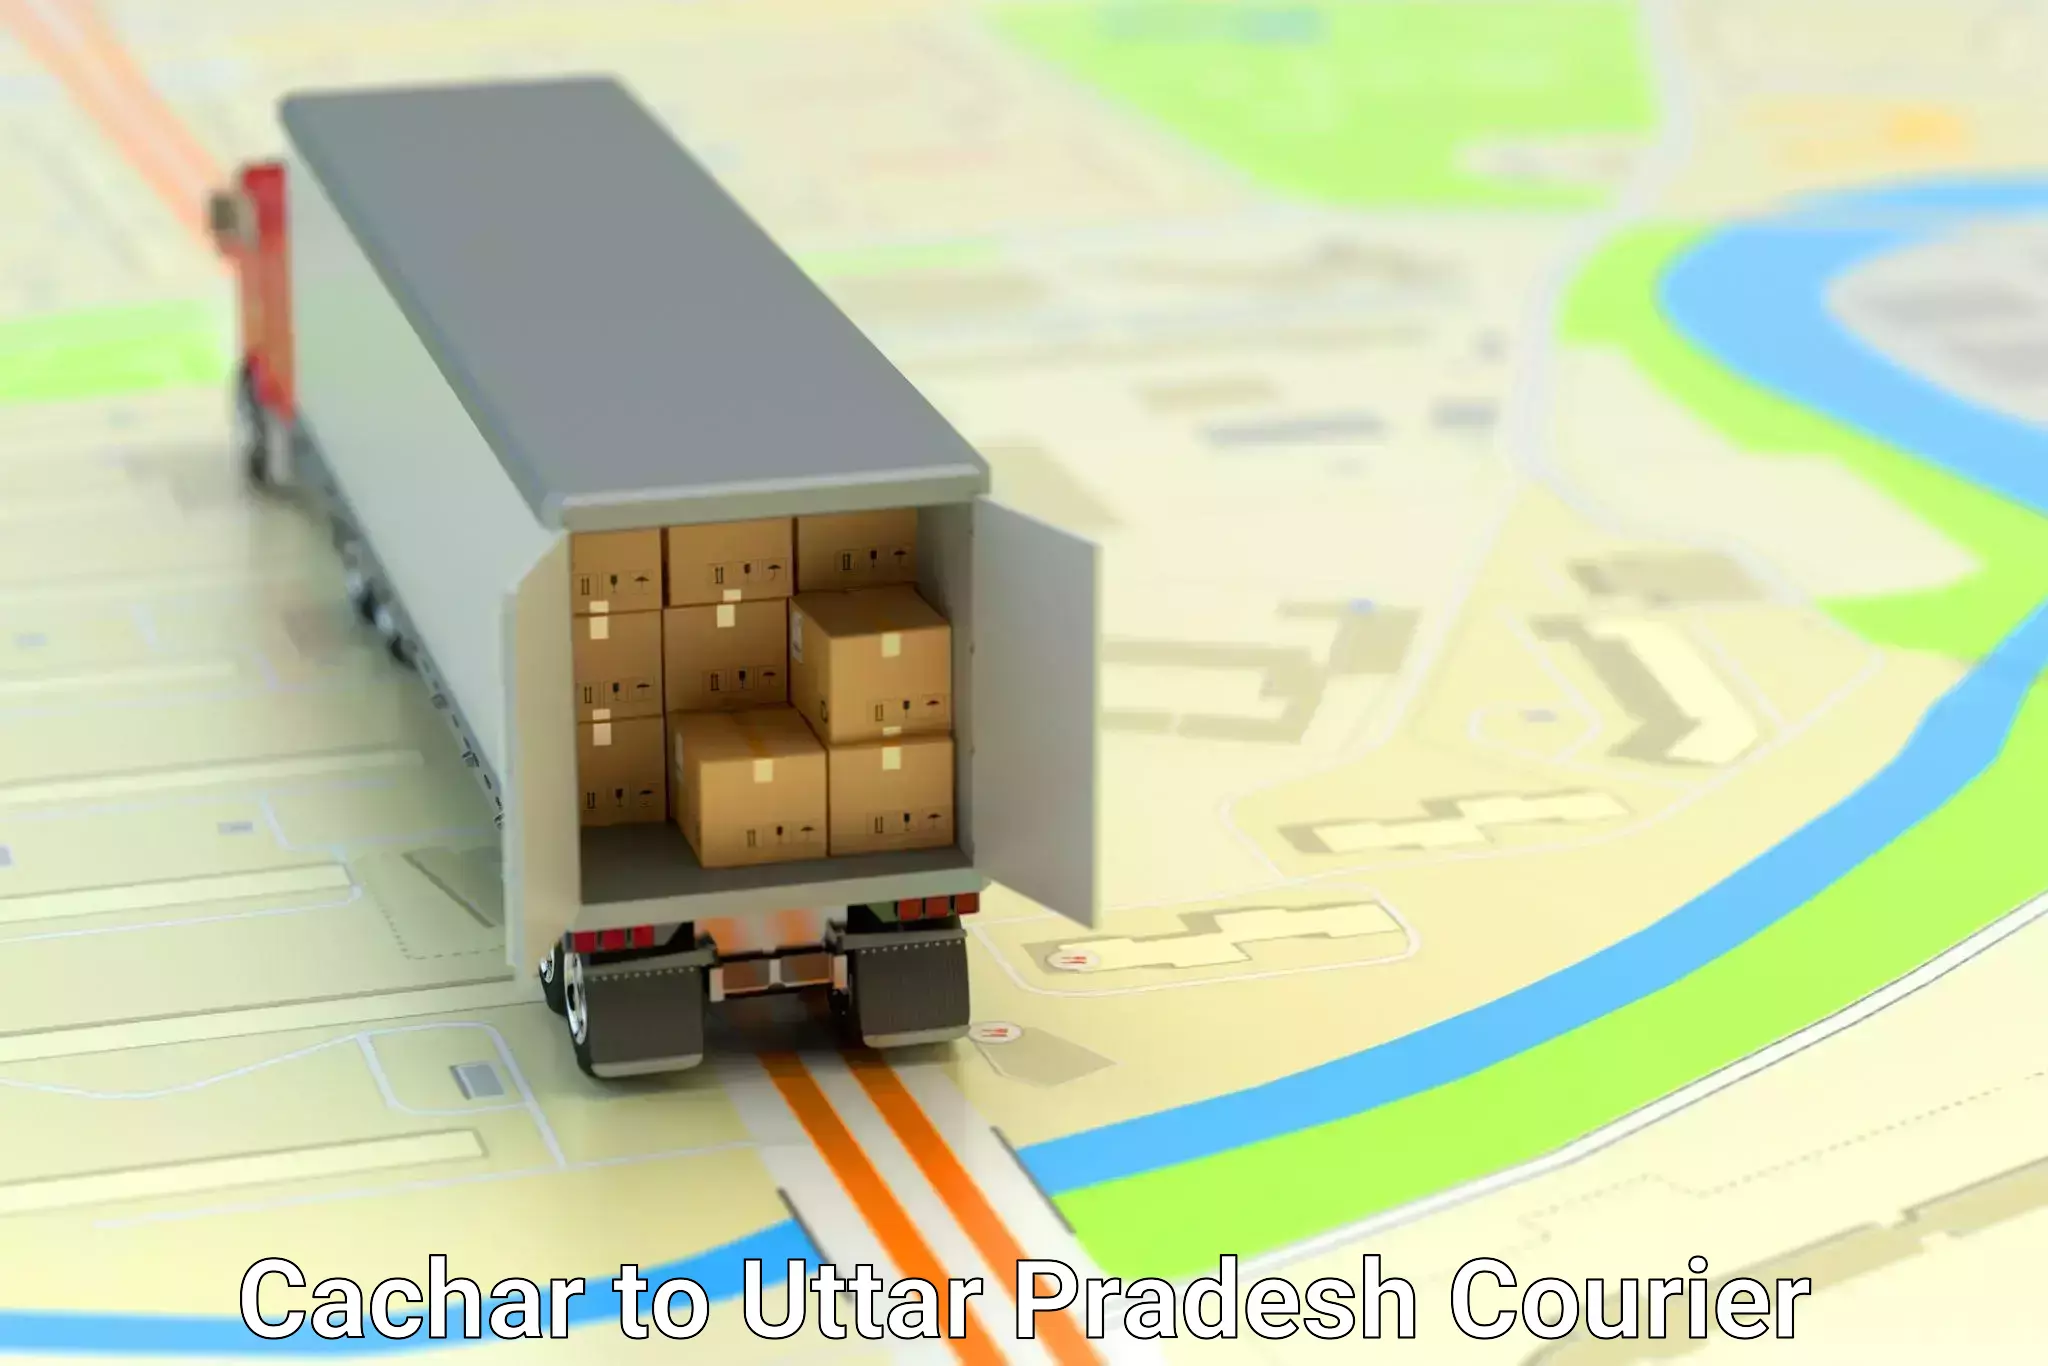 Express logistics providers Cachar to Meerut